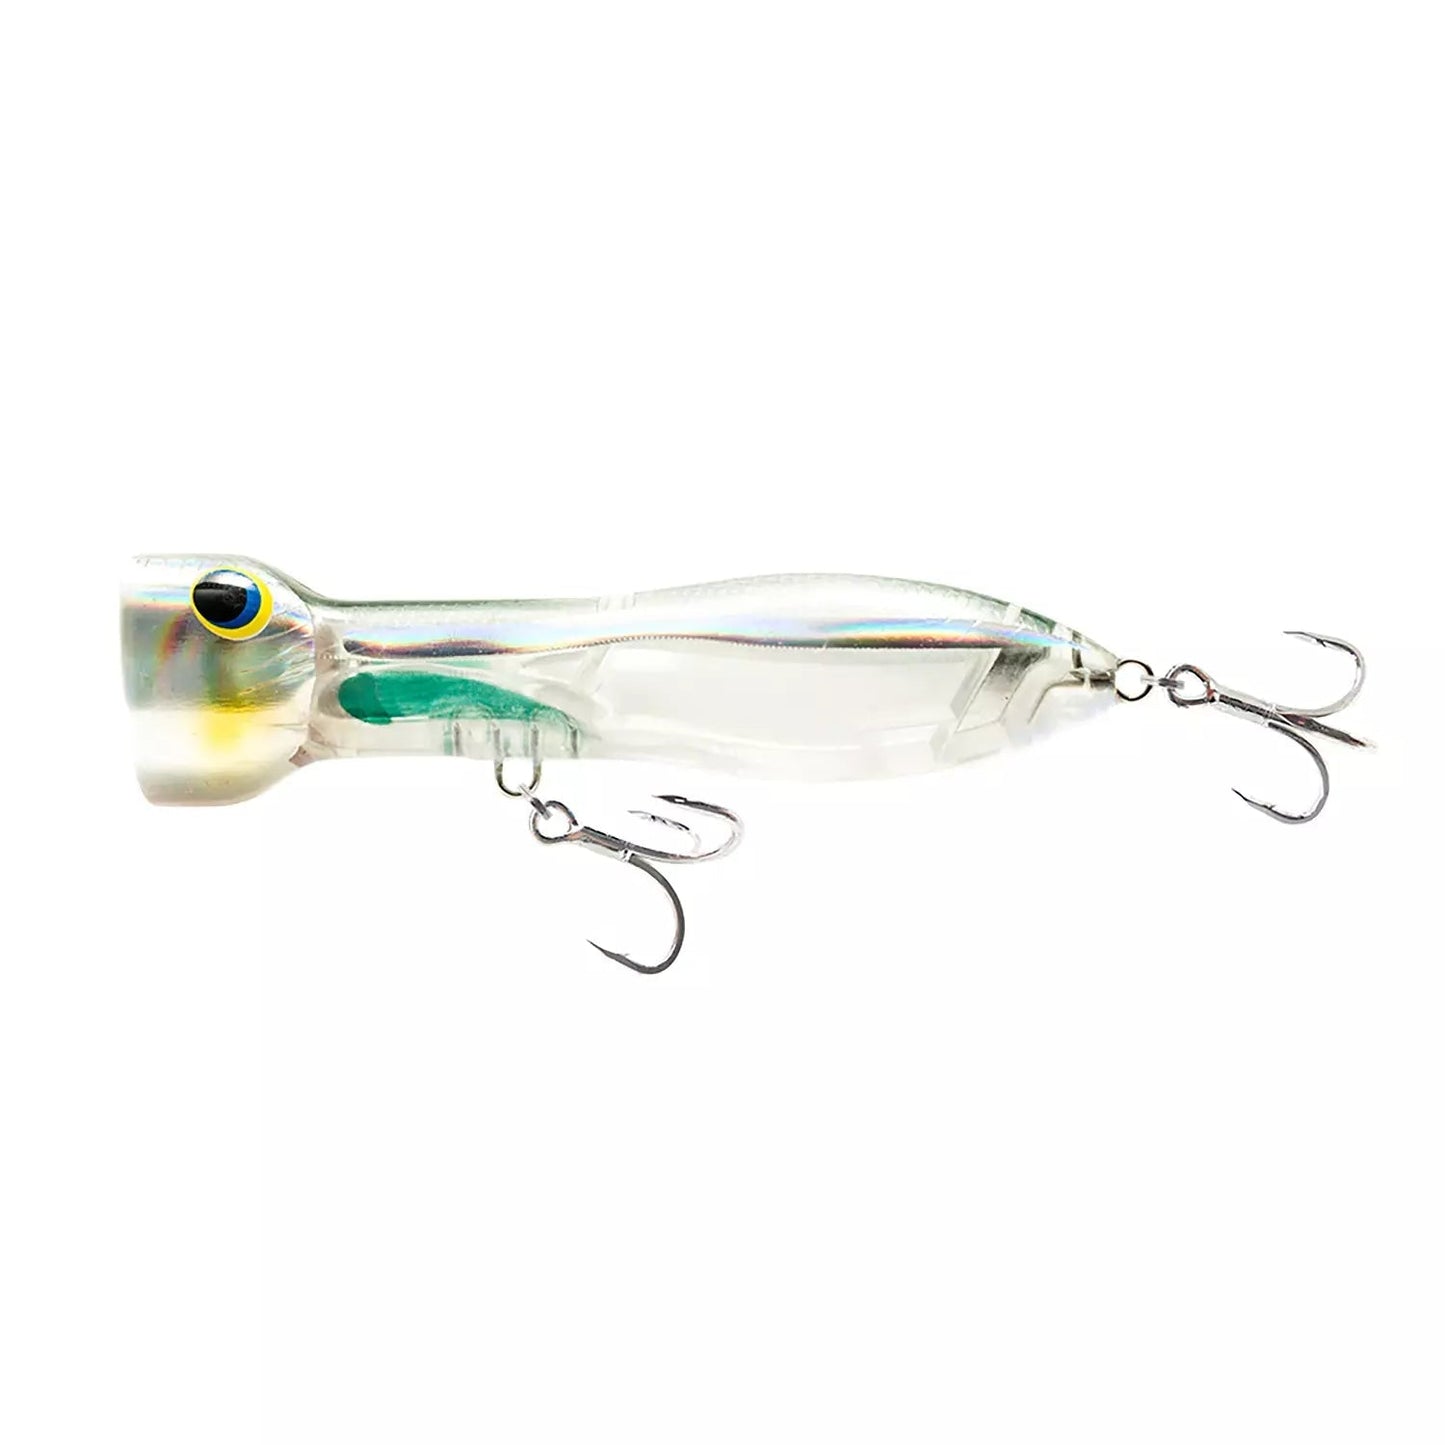 Nomad Design Chug Norris Popper-Lure - Poppers, Stickbaits & Pencils-Nomad-95mm-Holo Ghost Shad-Fishing Station